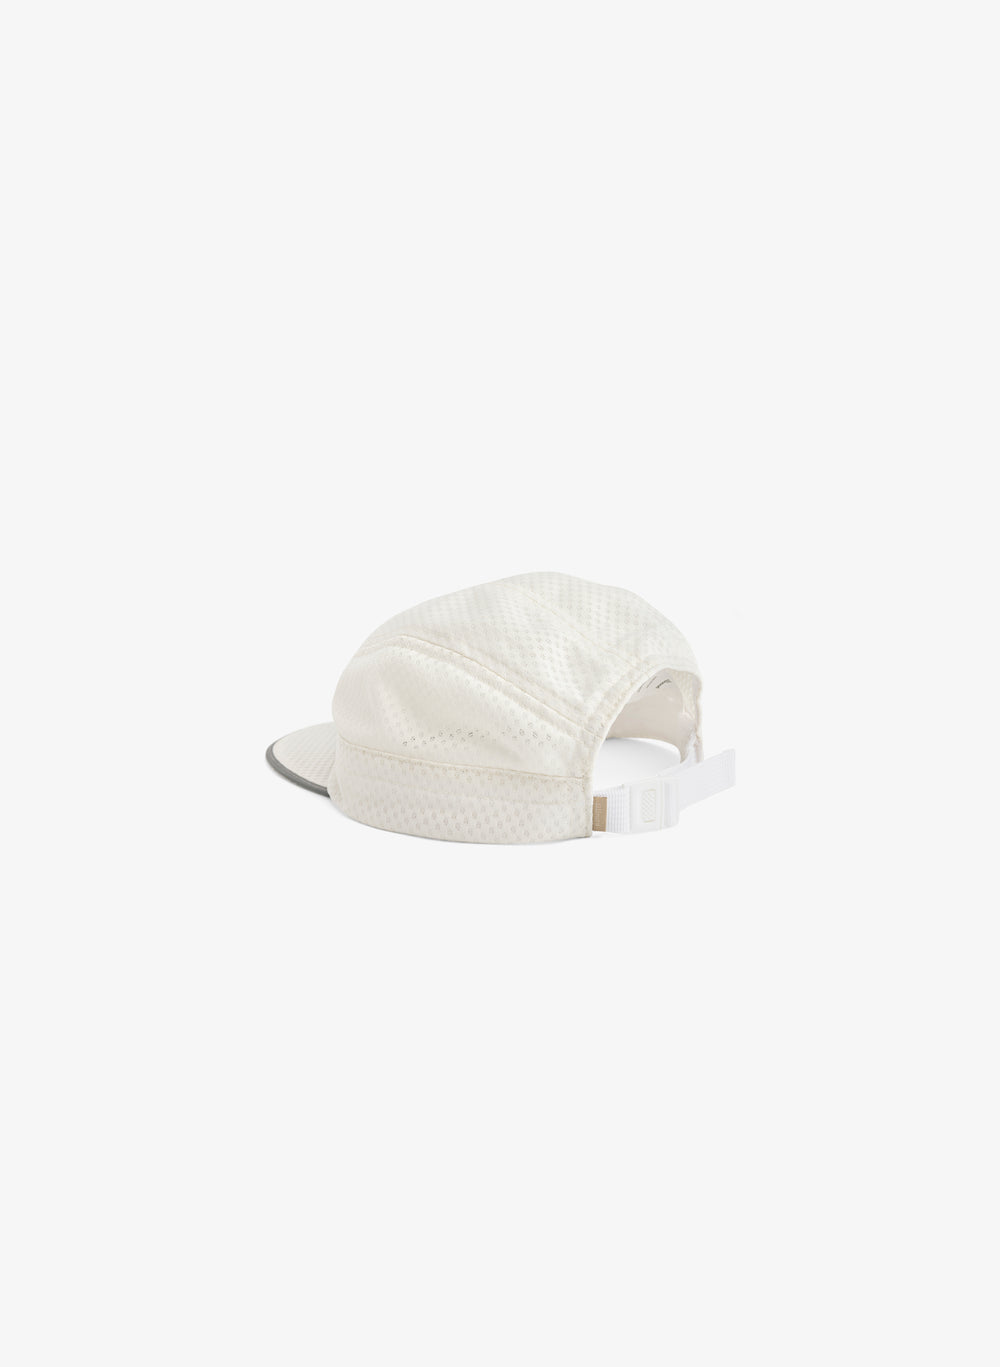 Victory Cap - Off White